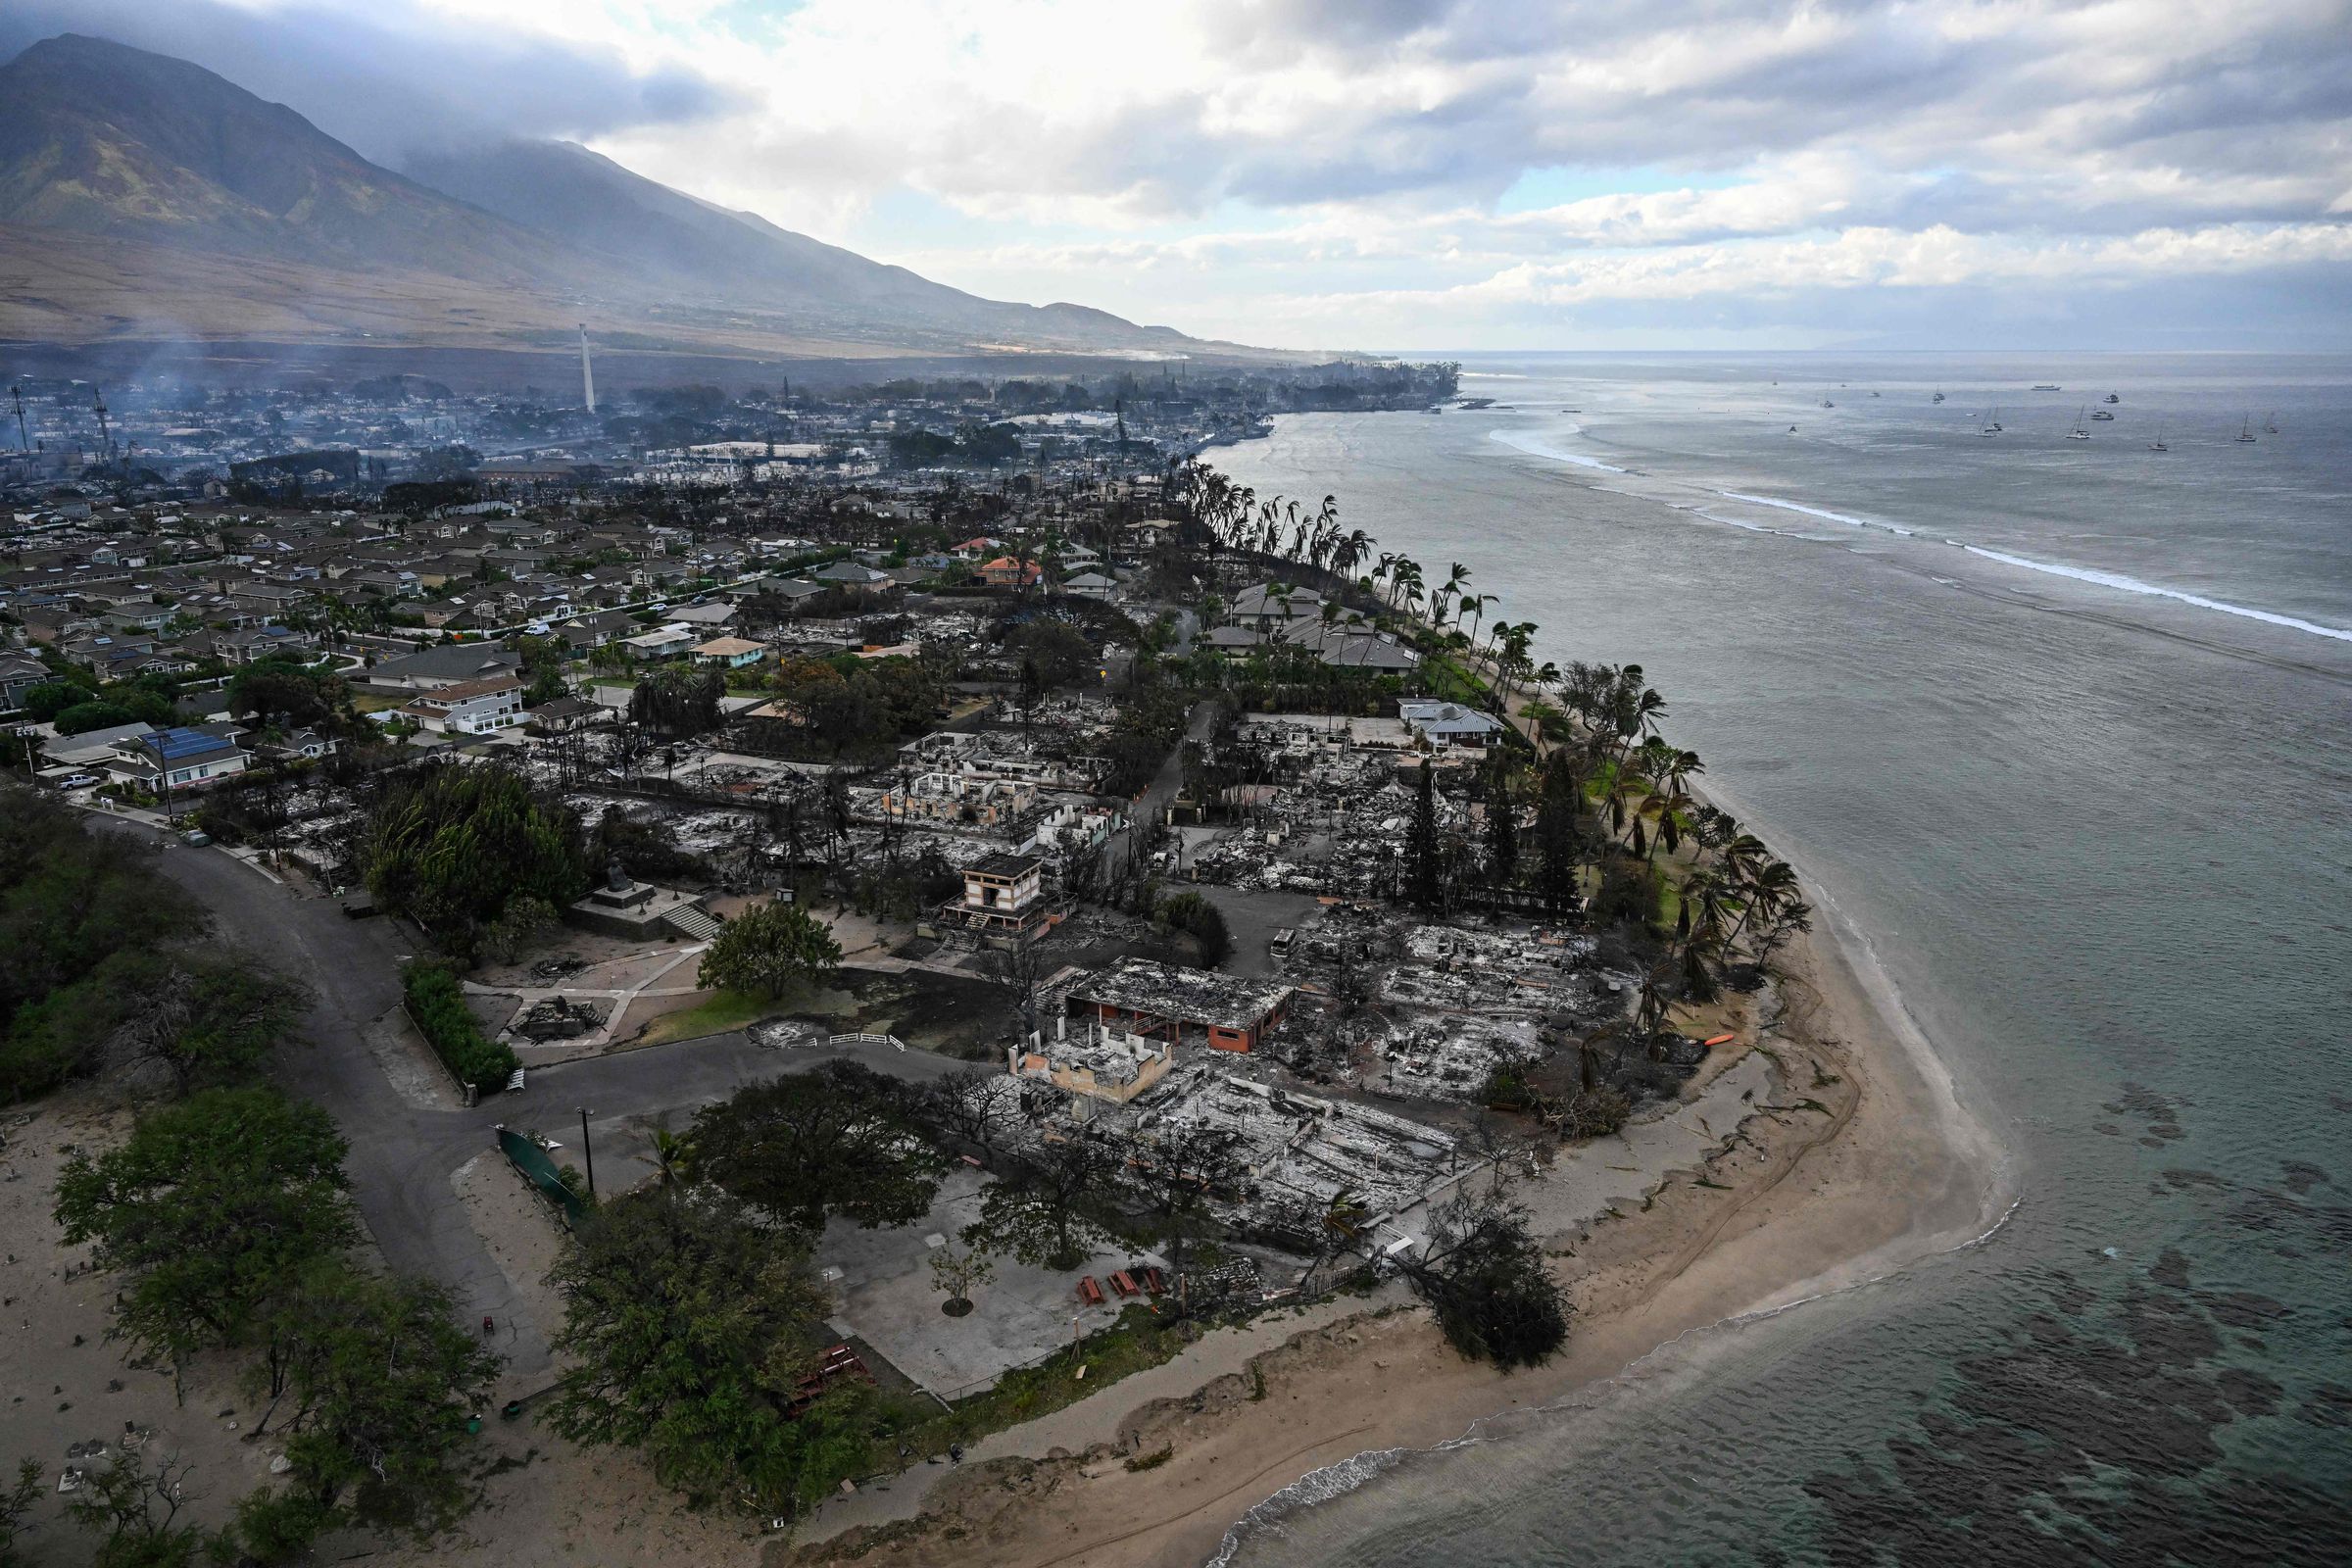 Smoke rises from remnants of burned homes and buildings in a community by the shoreline.